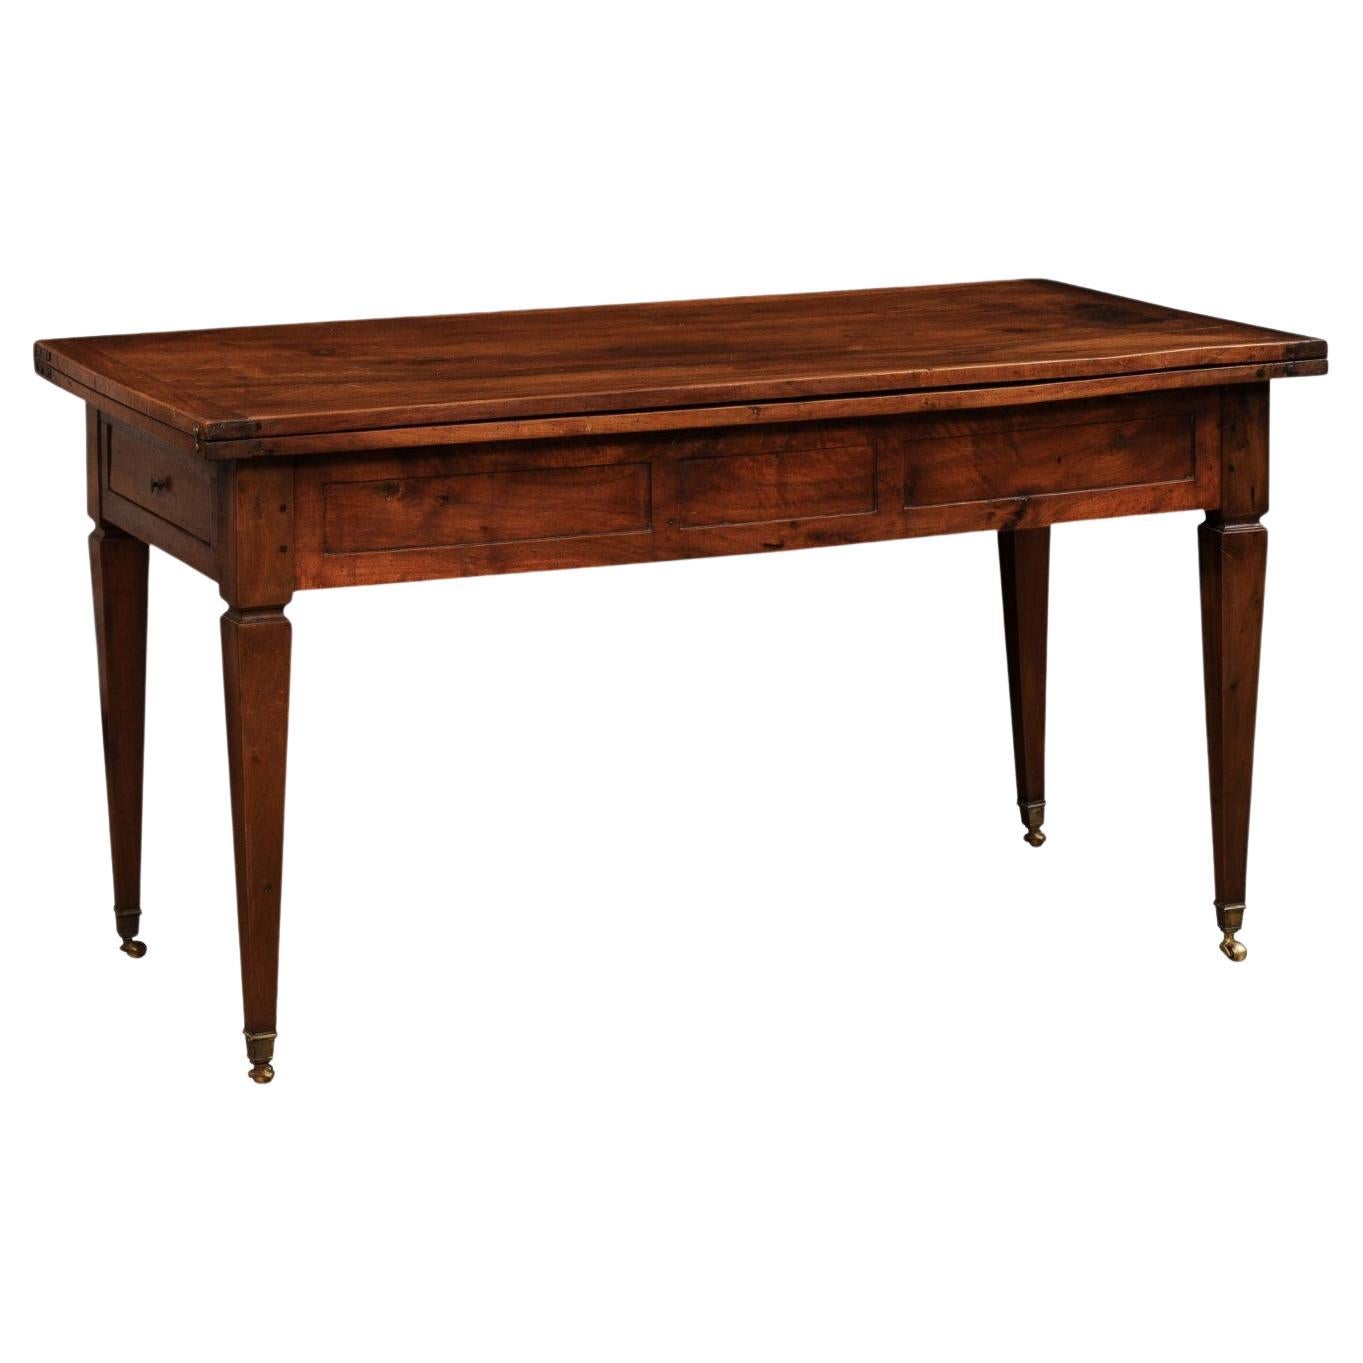 French Directoire Style 19th Century Walnut Table with Folding Top, Tapered Legs For Sale